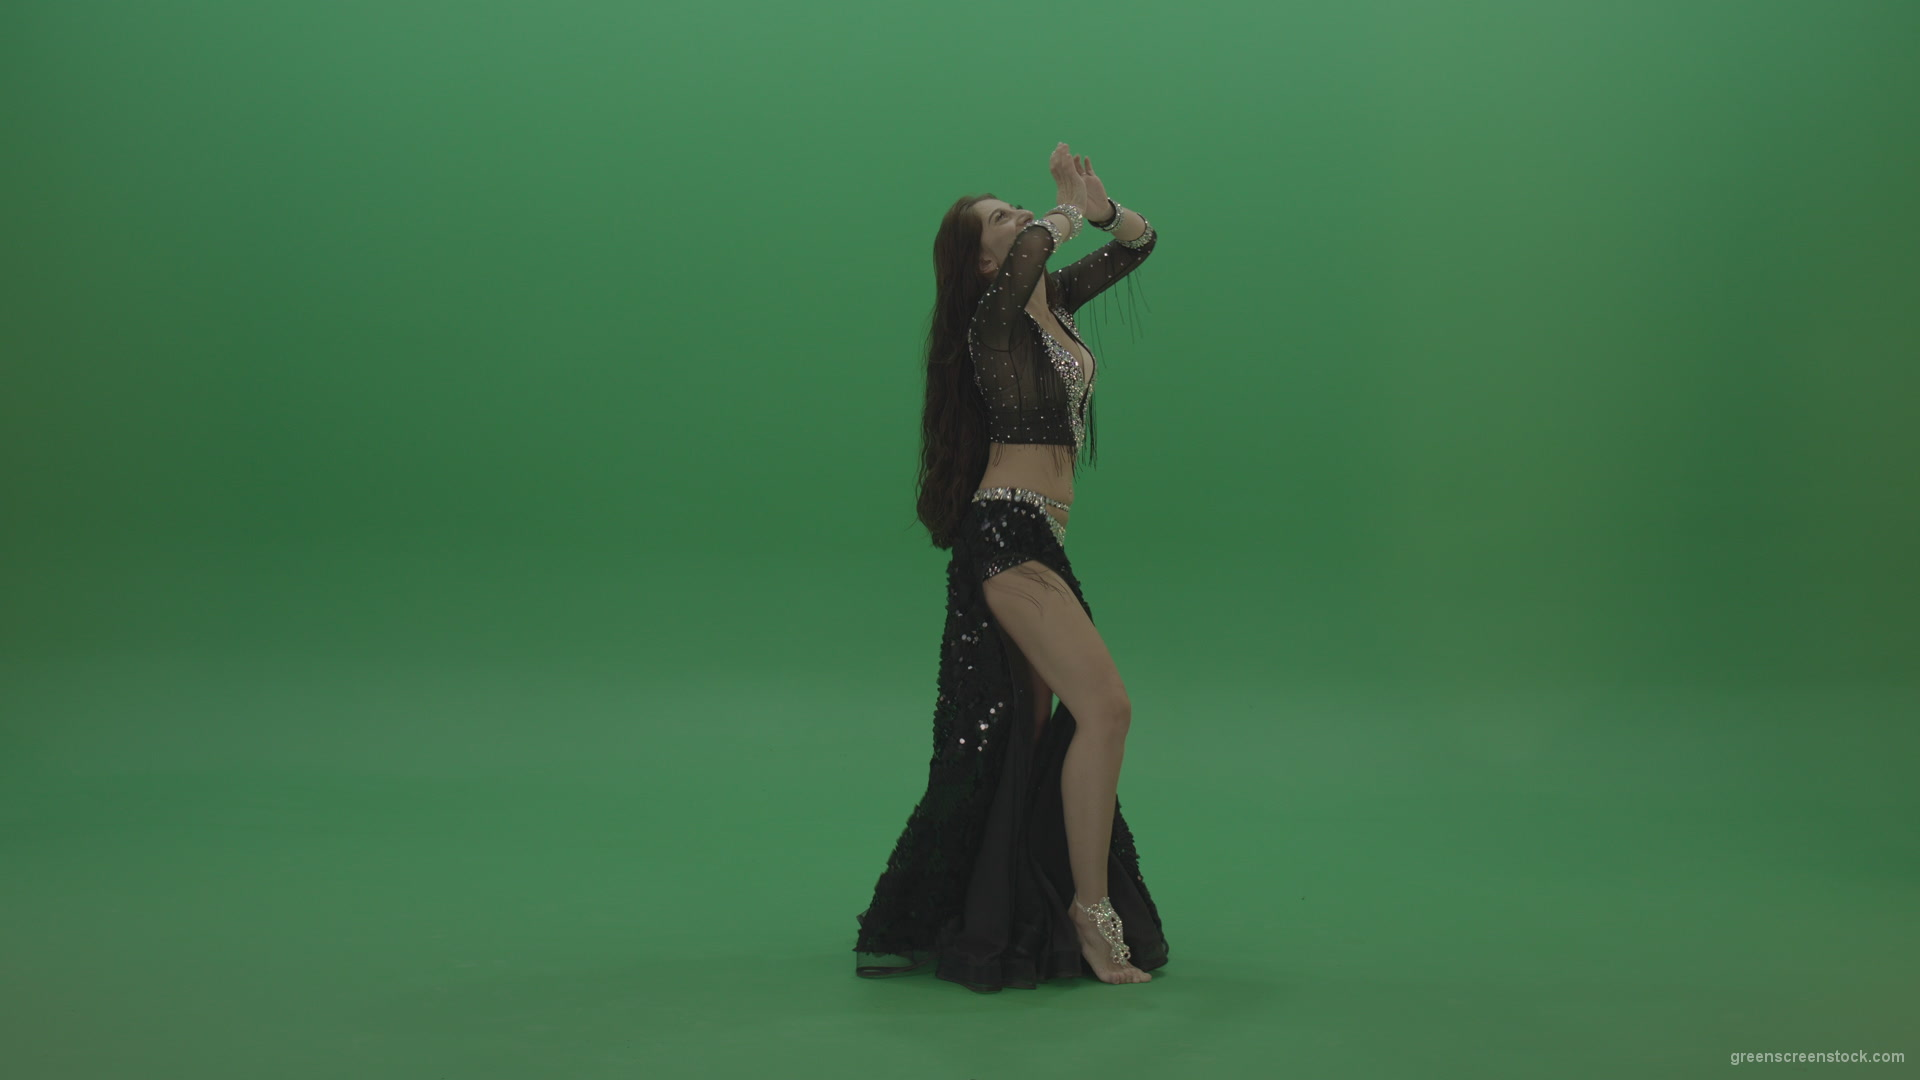 Gorgeous-belly-dancer-in-black-wear-display-amazing-dance-moves-over-chromakey-background_006 Green Screen Stock